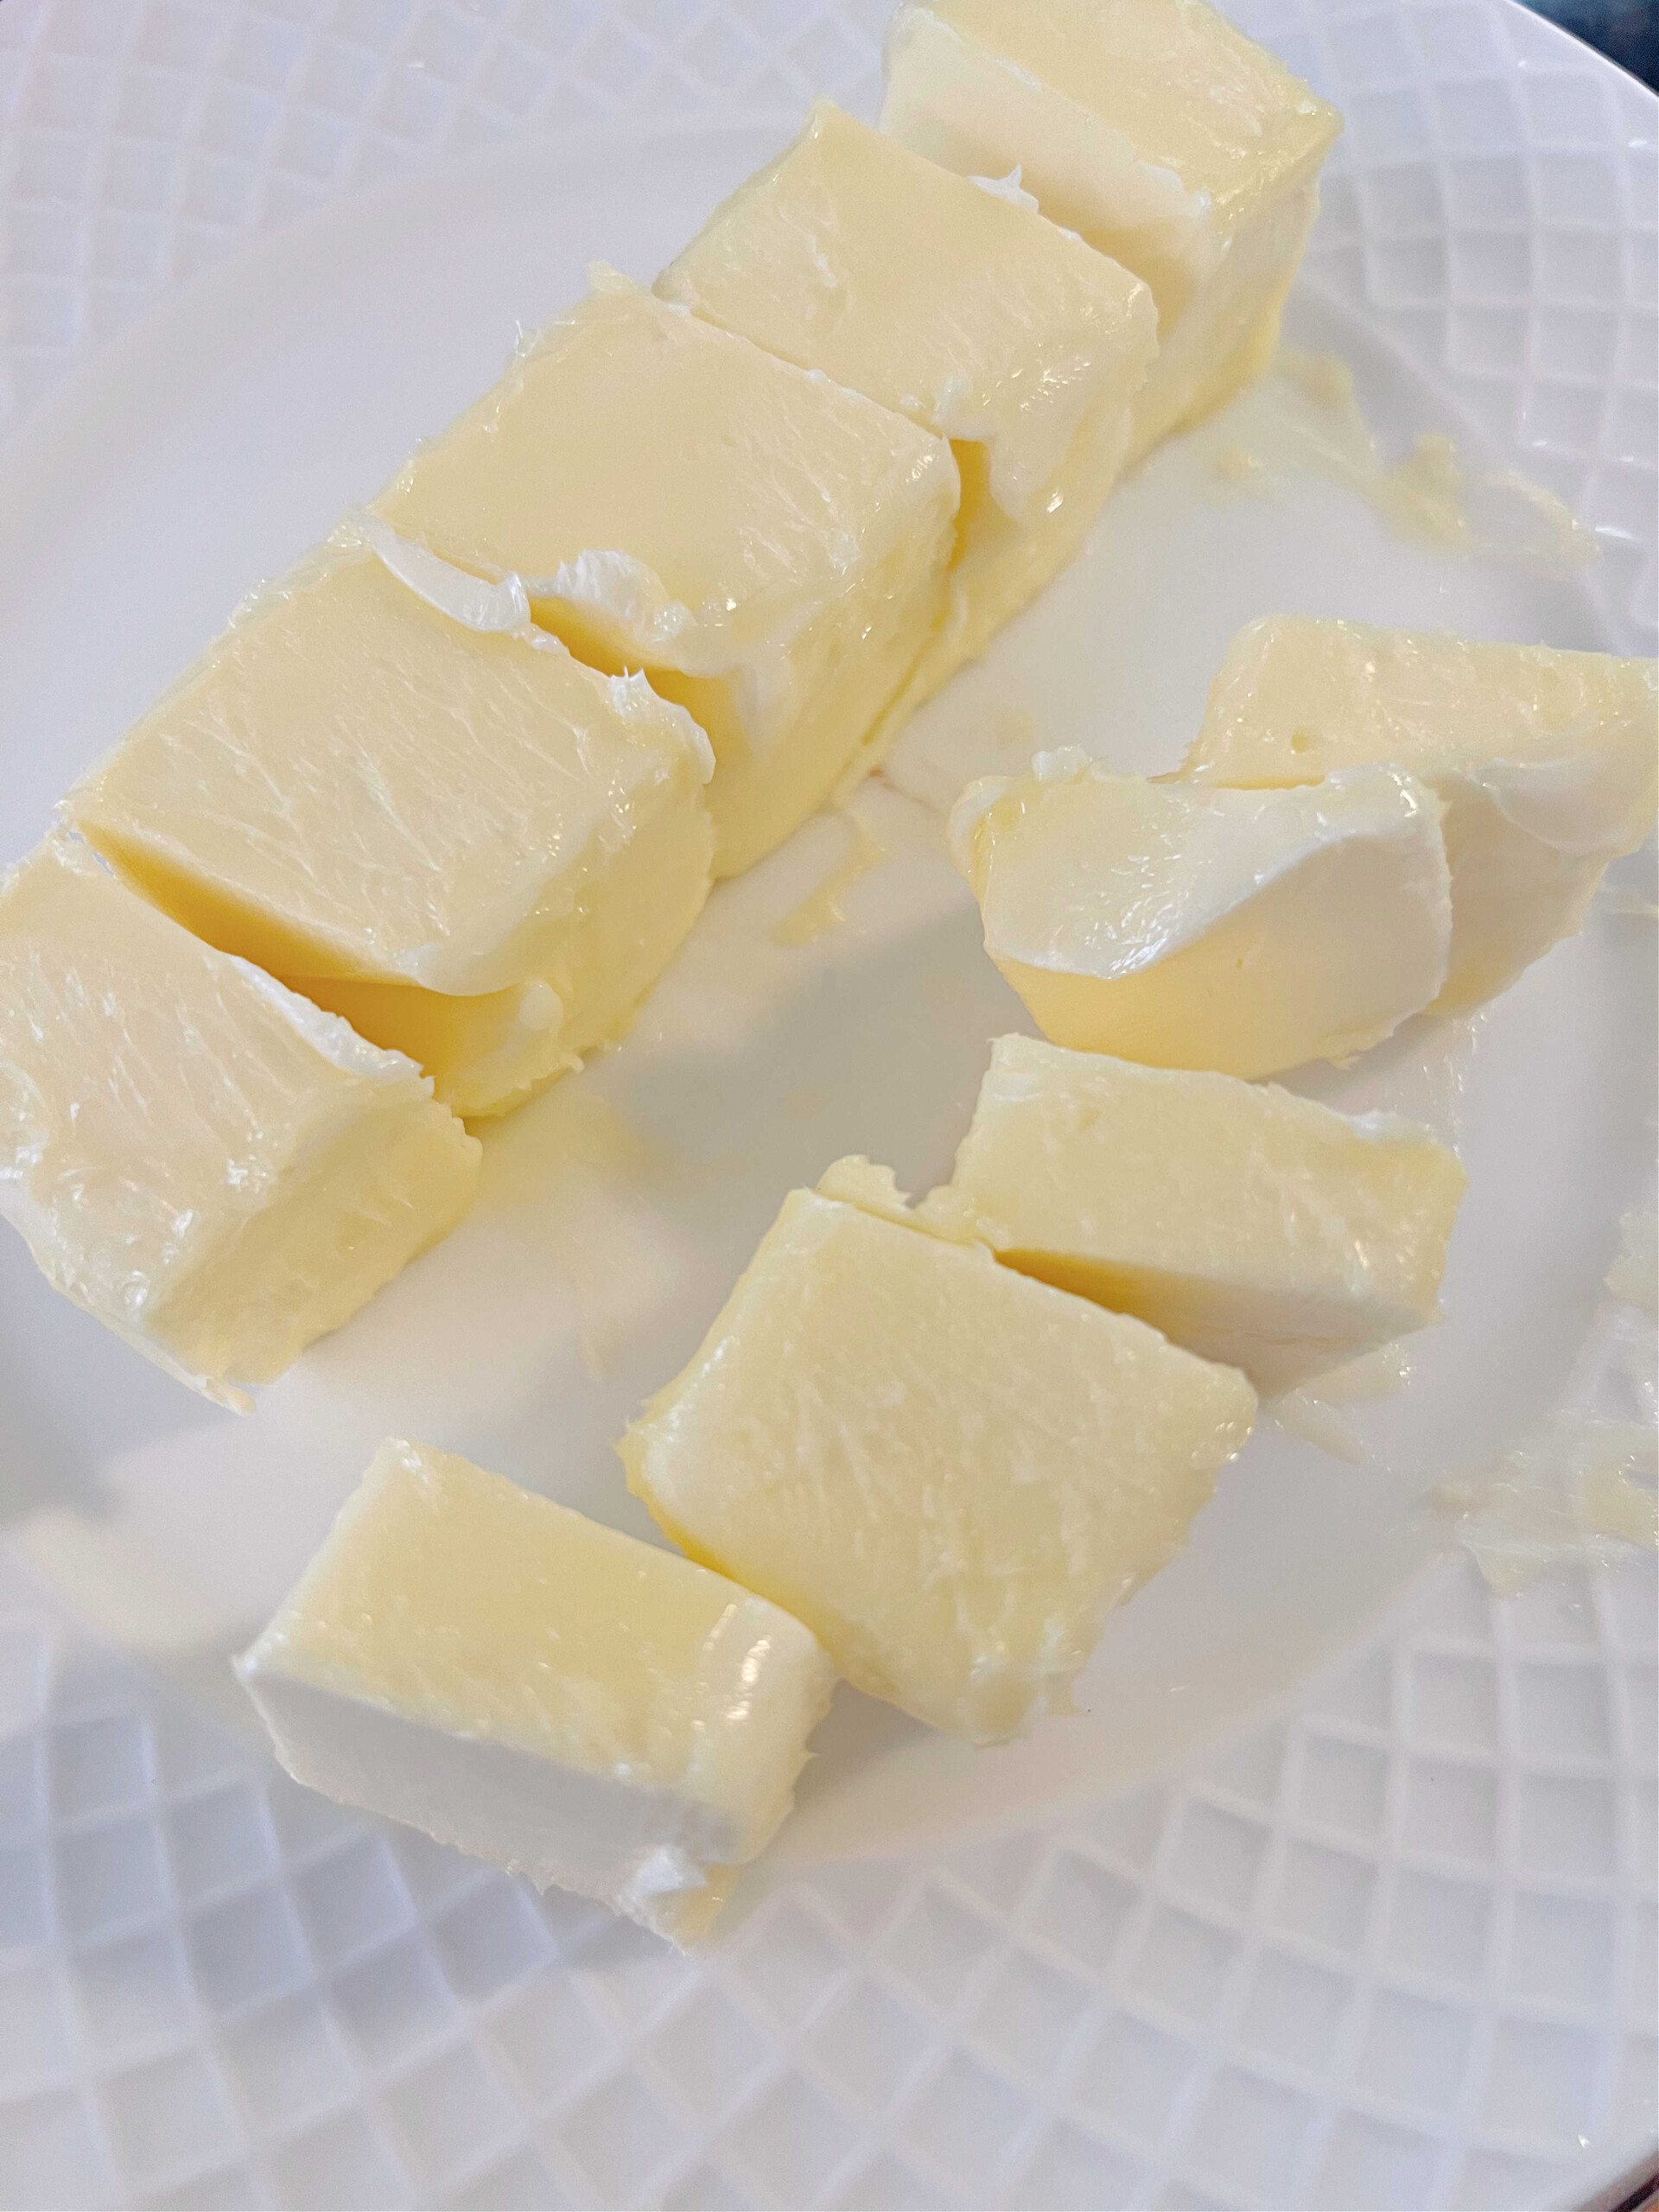 Slightly softened butter on a white plate.